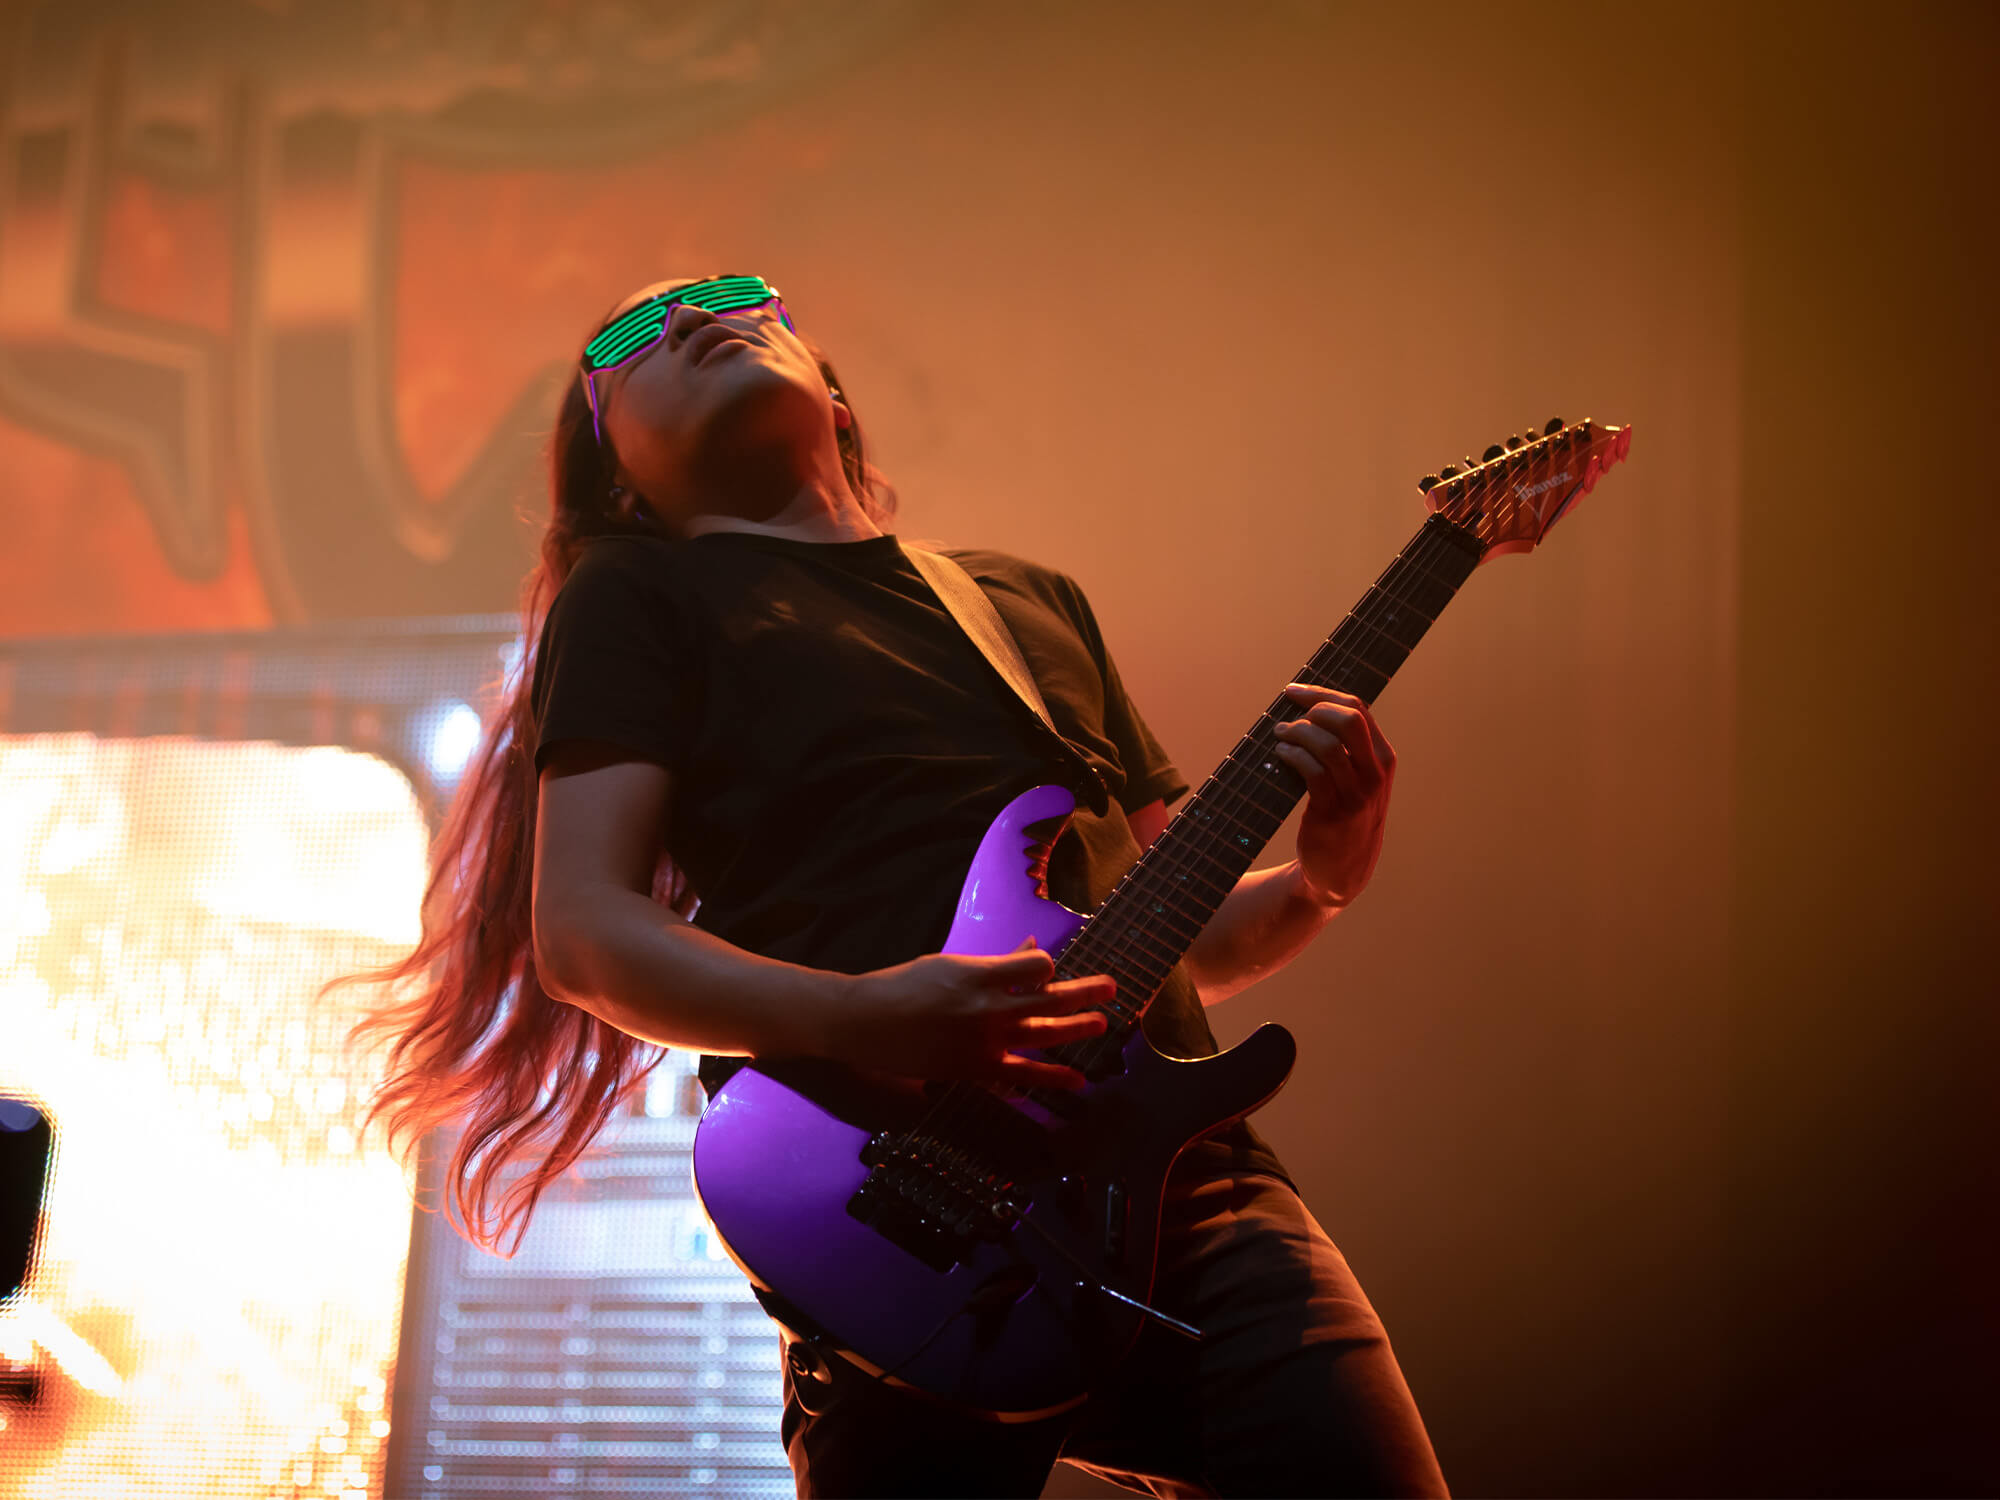 Herman Li on stage. He is playing a bright purple guitar and is wearing illuminating green shades.